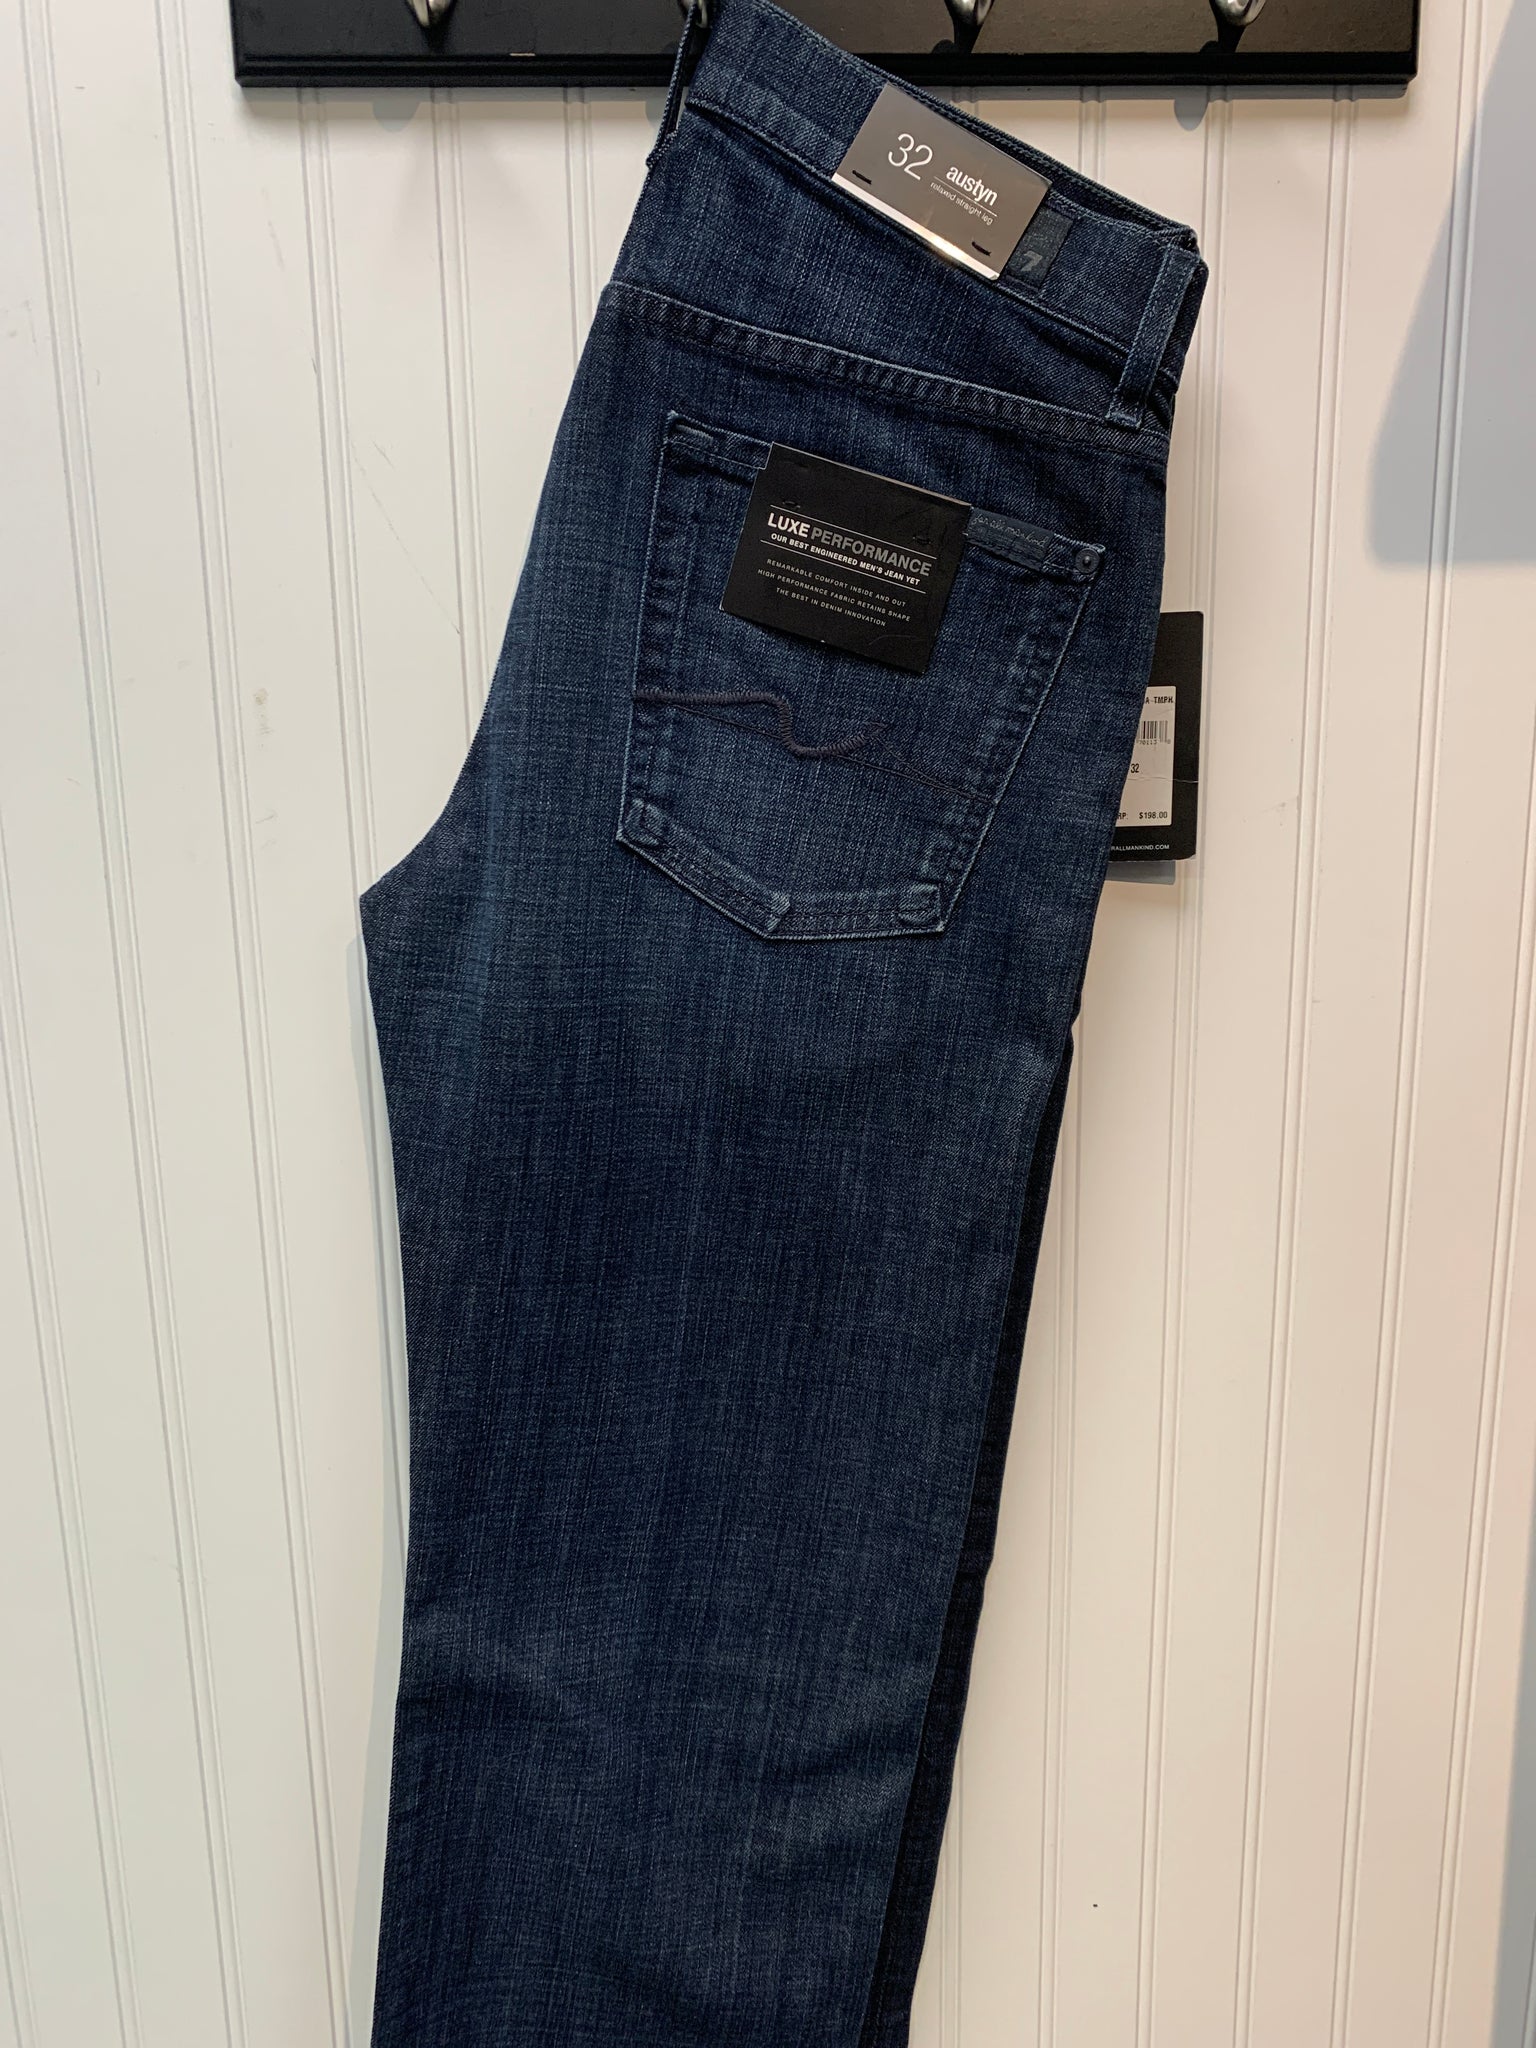 Aggregate more than 109 for all mankind denim super hot